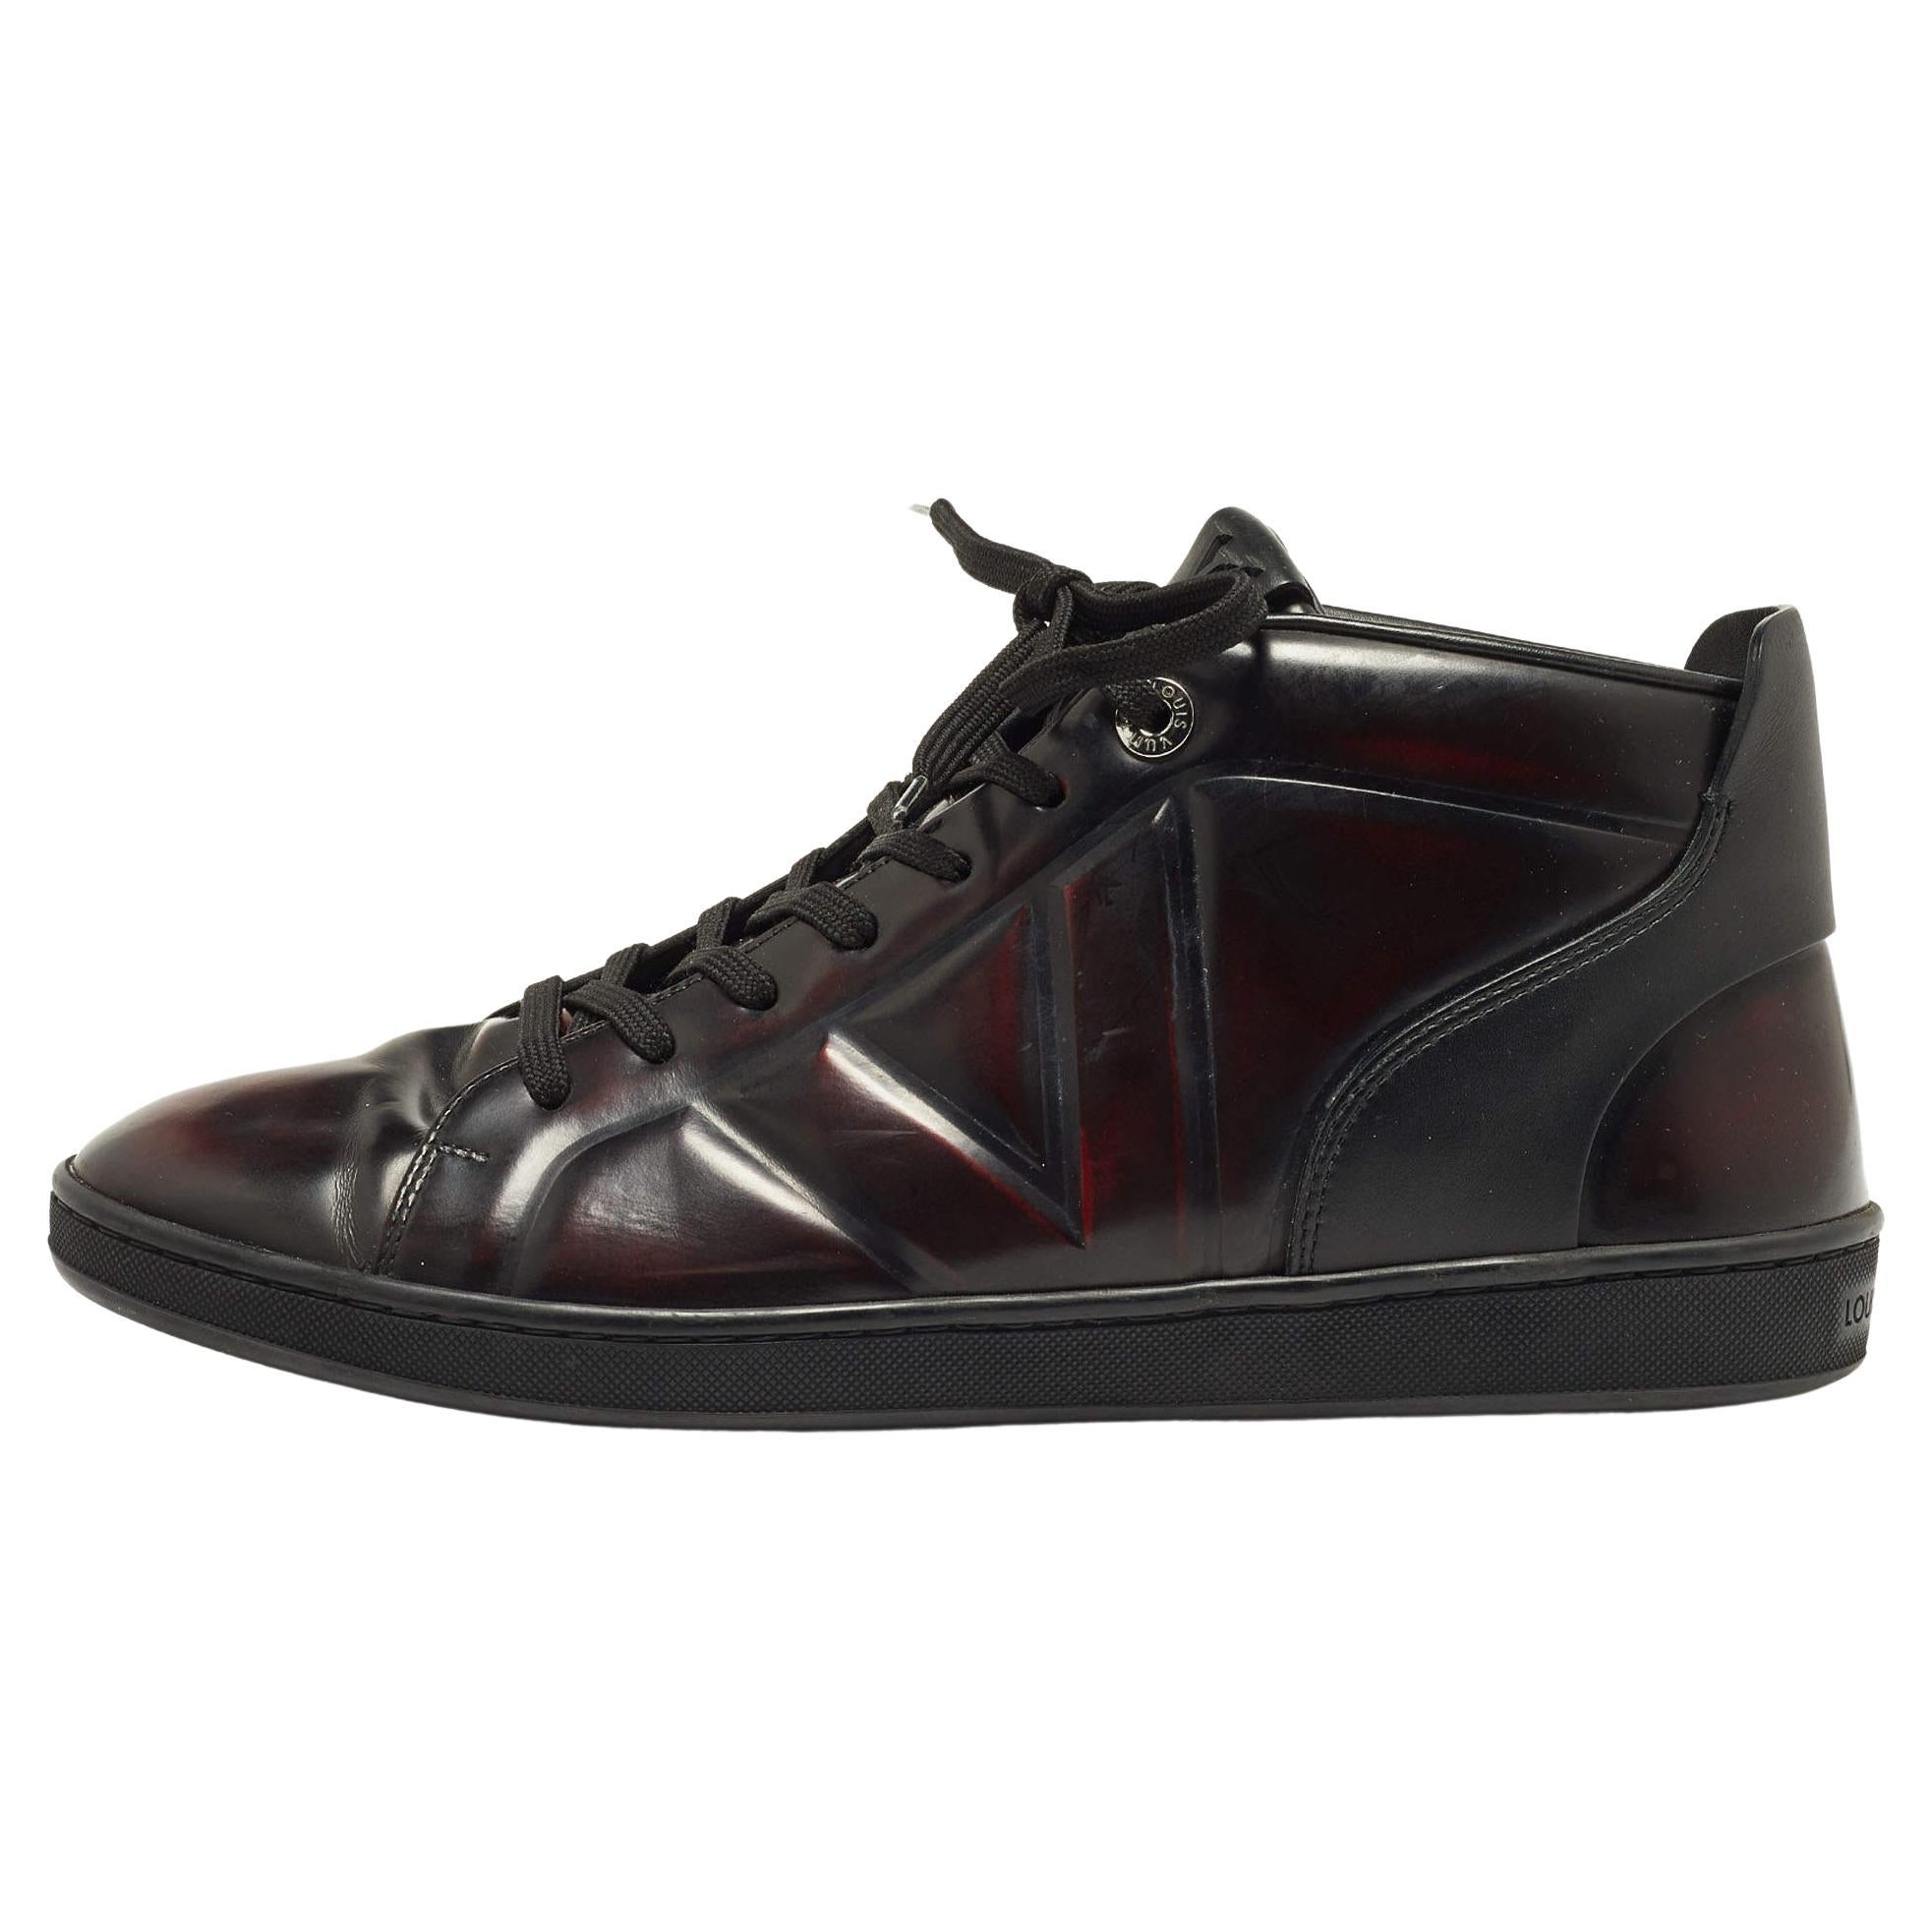 Louis Vuitton Two Tone Leather High Top Sneakers Size 42 For Sale